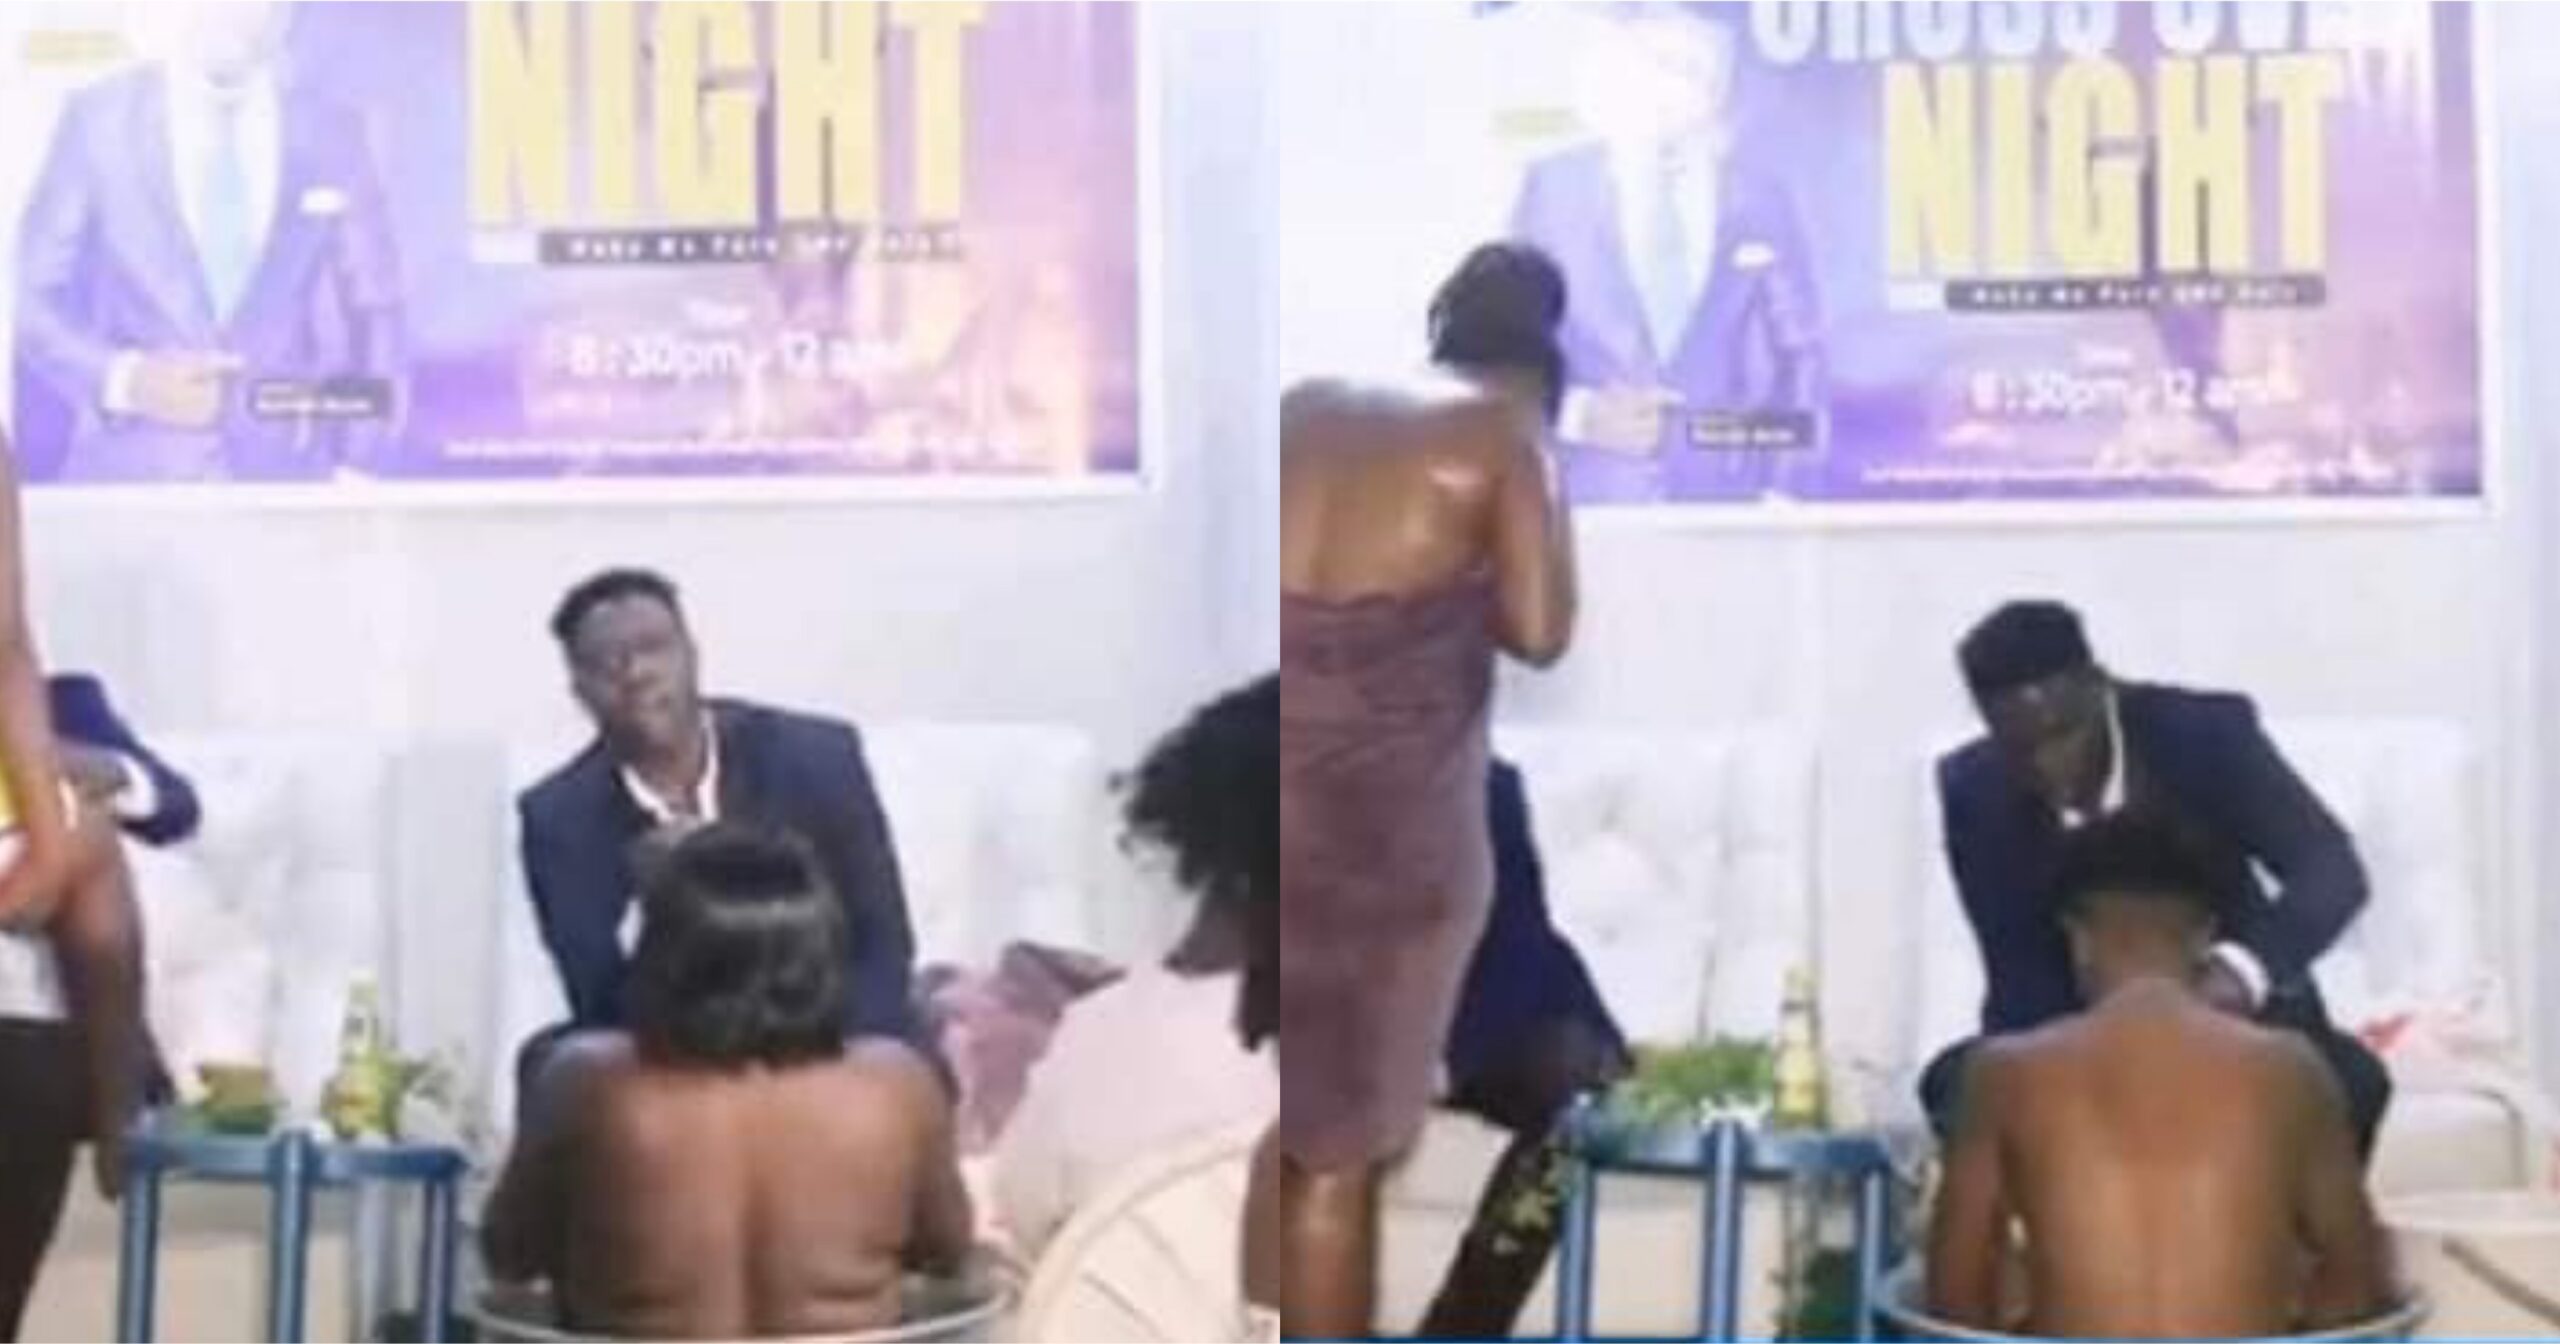 WATCH VIDEO : #31stNight Hits Ghana: Pastor Bathes Young Church Members in Church, Says It’